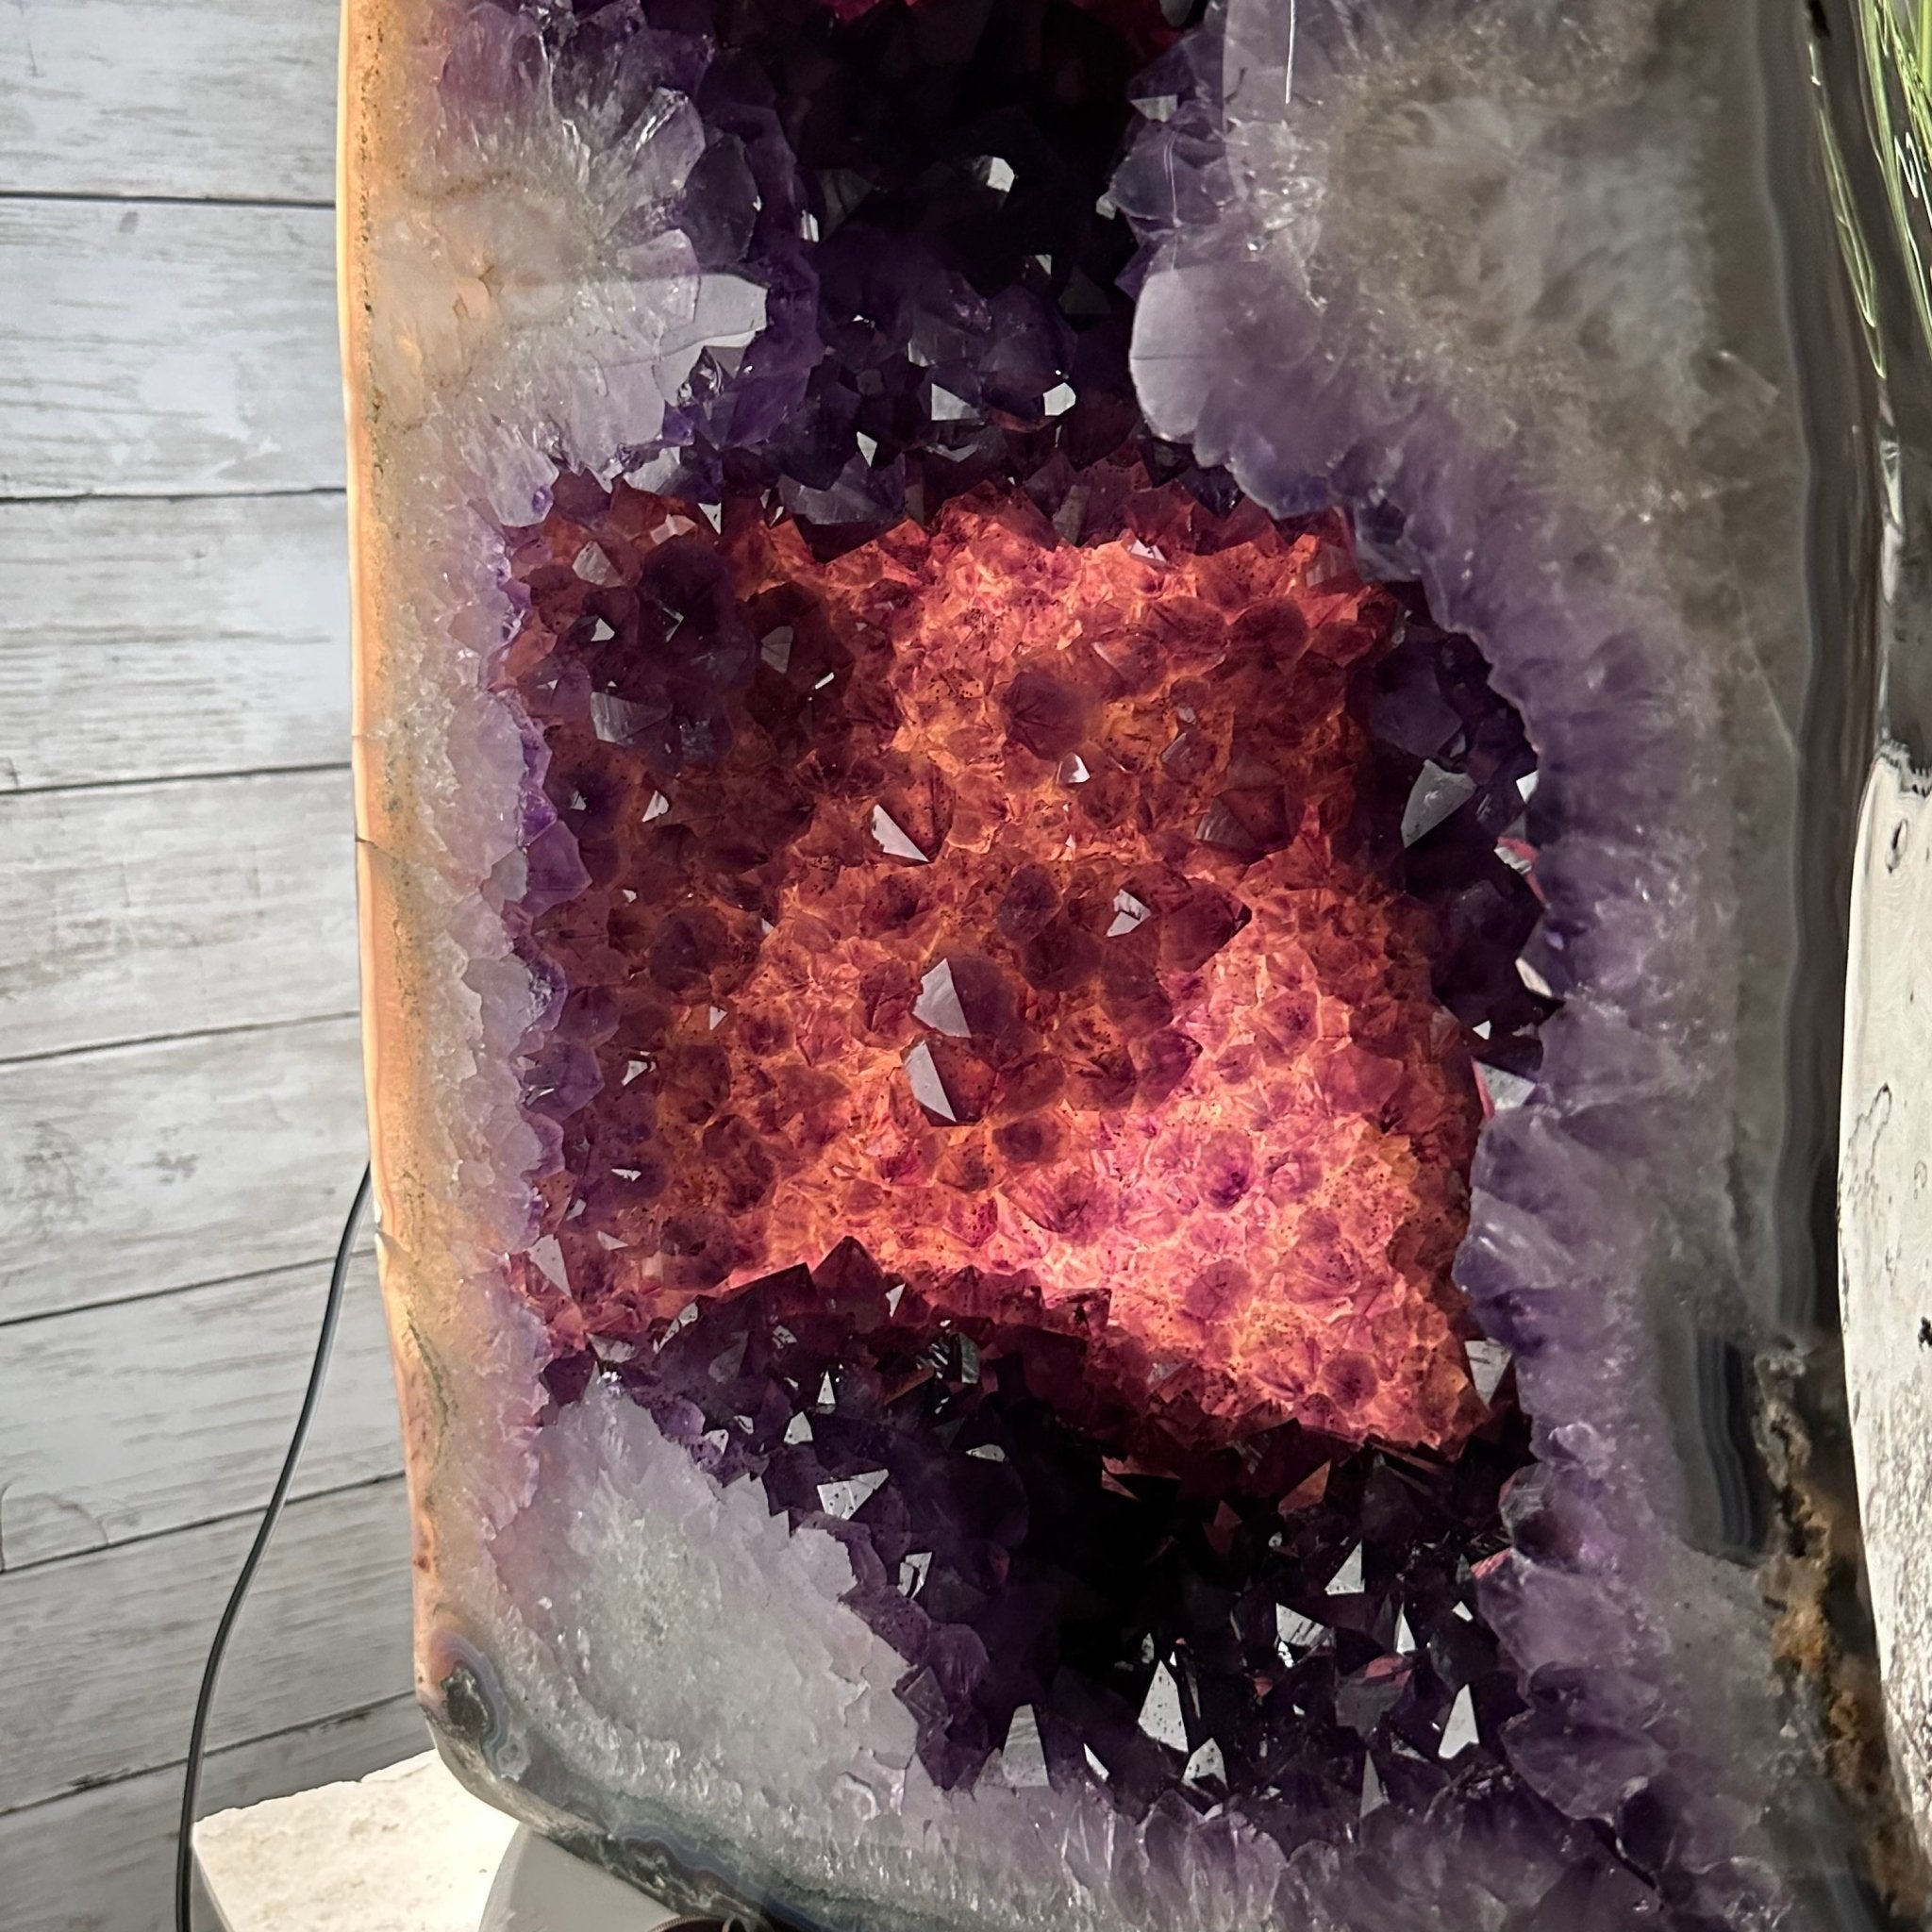 Extra Plus Quality Polished Brazilian Amethyst Cathedral, 103.1 lbs & 19.5" tall Model #5602-0060 by Brazil Gems - Brazil GemsBrazil GemsExtra Plus Quality Polished Brazilian Amethyst Cathedral, 103.1 lbs & 19.5" tall Model #5602-0060 by Brazil GemsPolished Cathedrals5602-0060